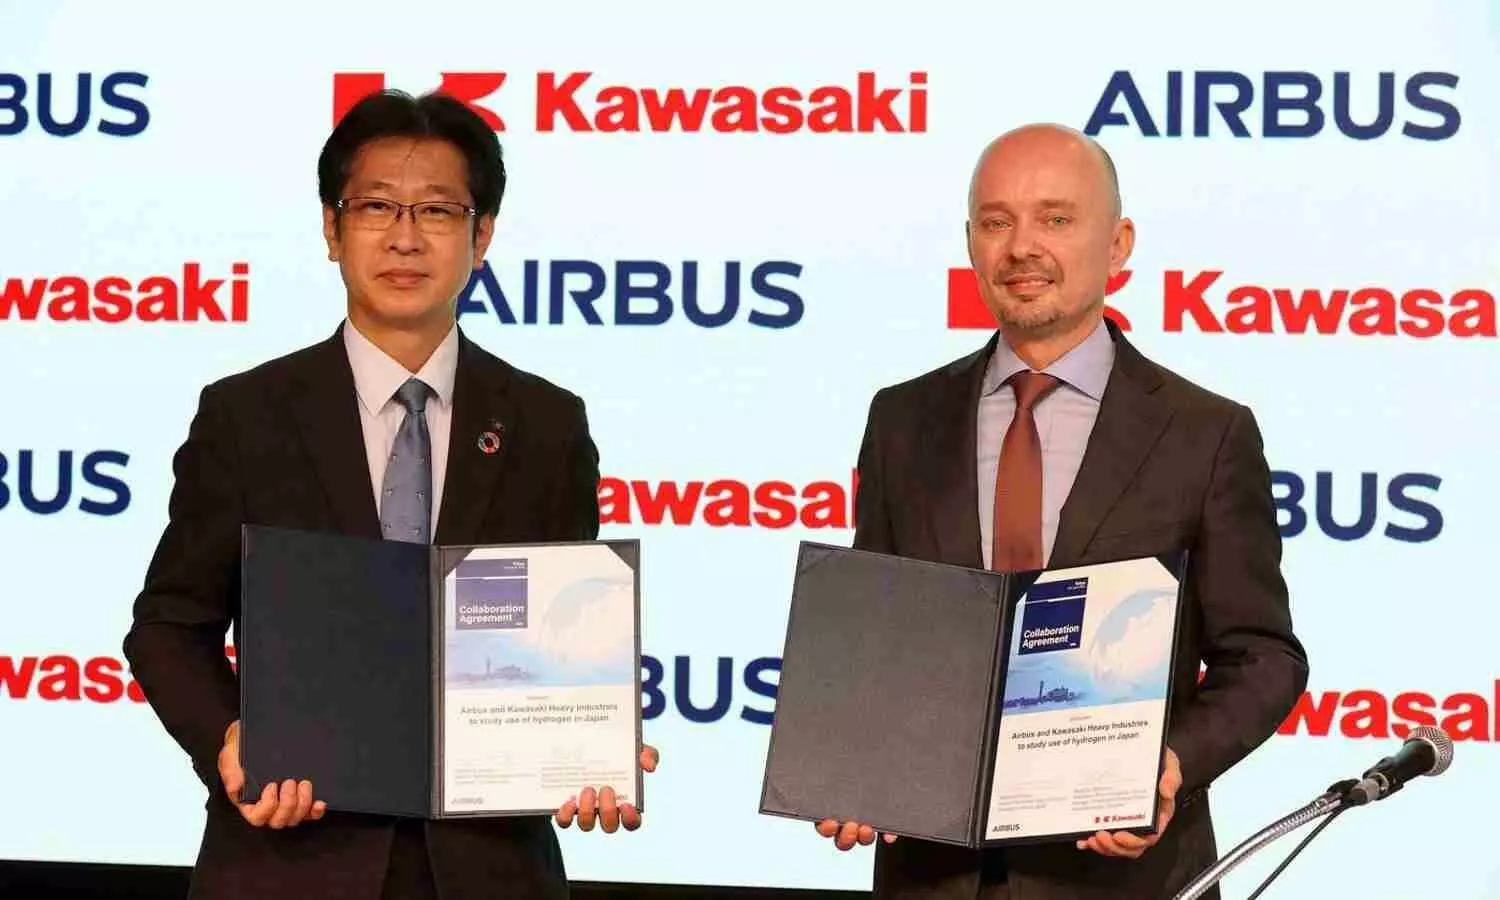 Airbus and Kawasaki partner for hydrogen-powered ecosystem in Japan